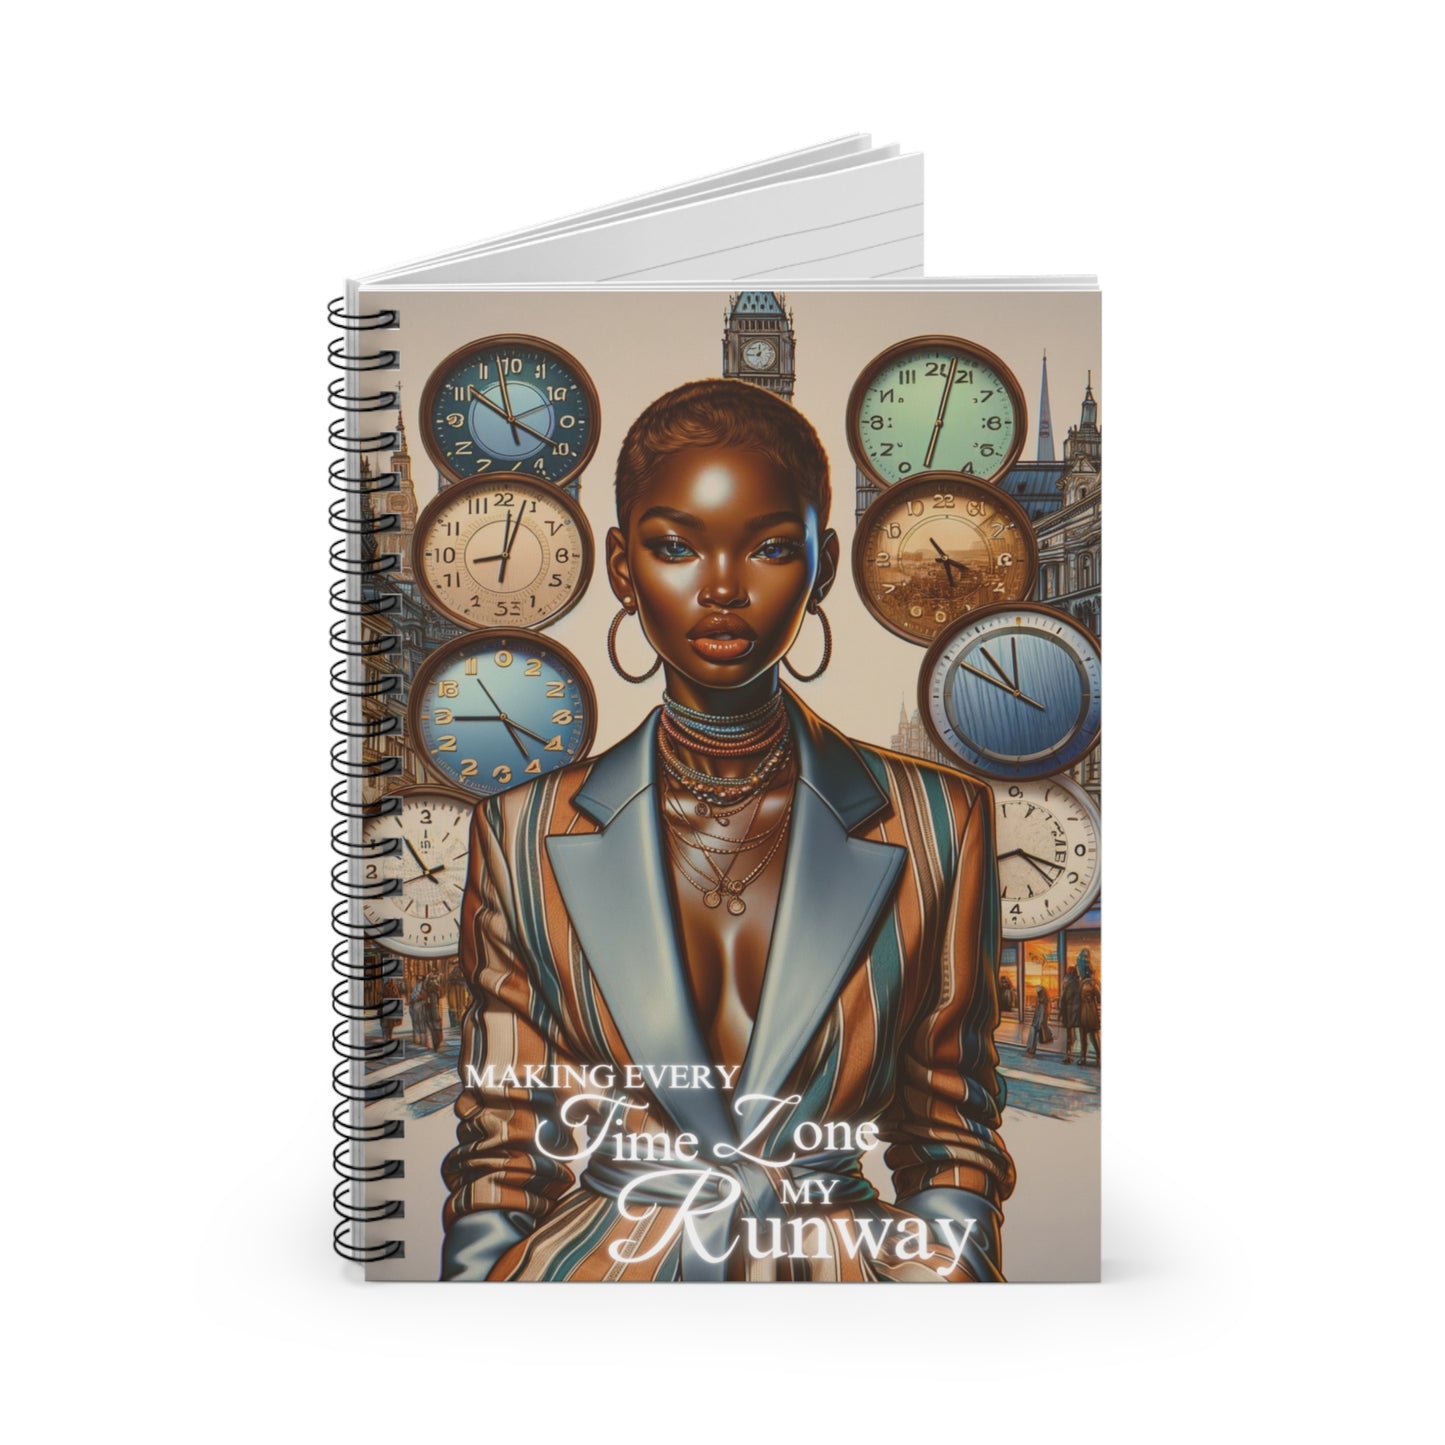 Making Every Time Zone My Runway Journal